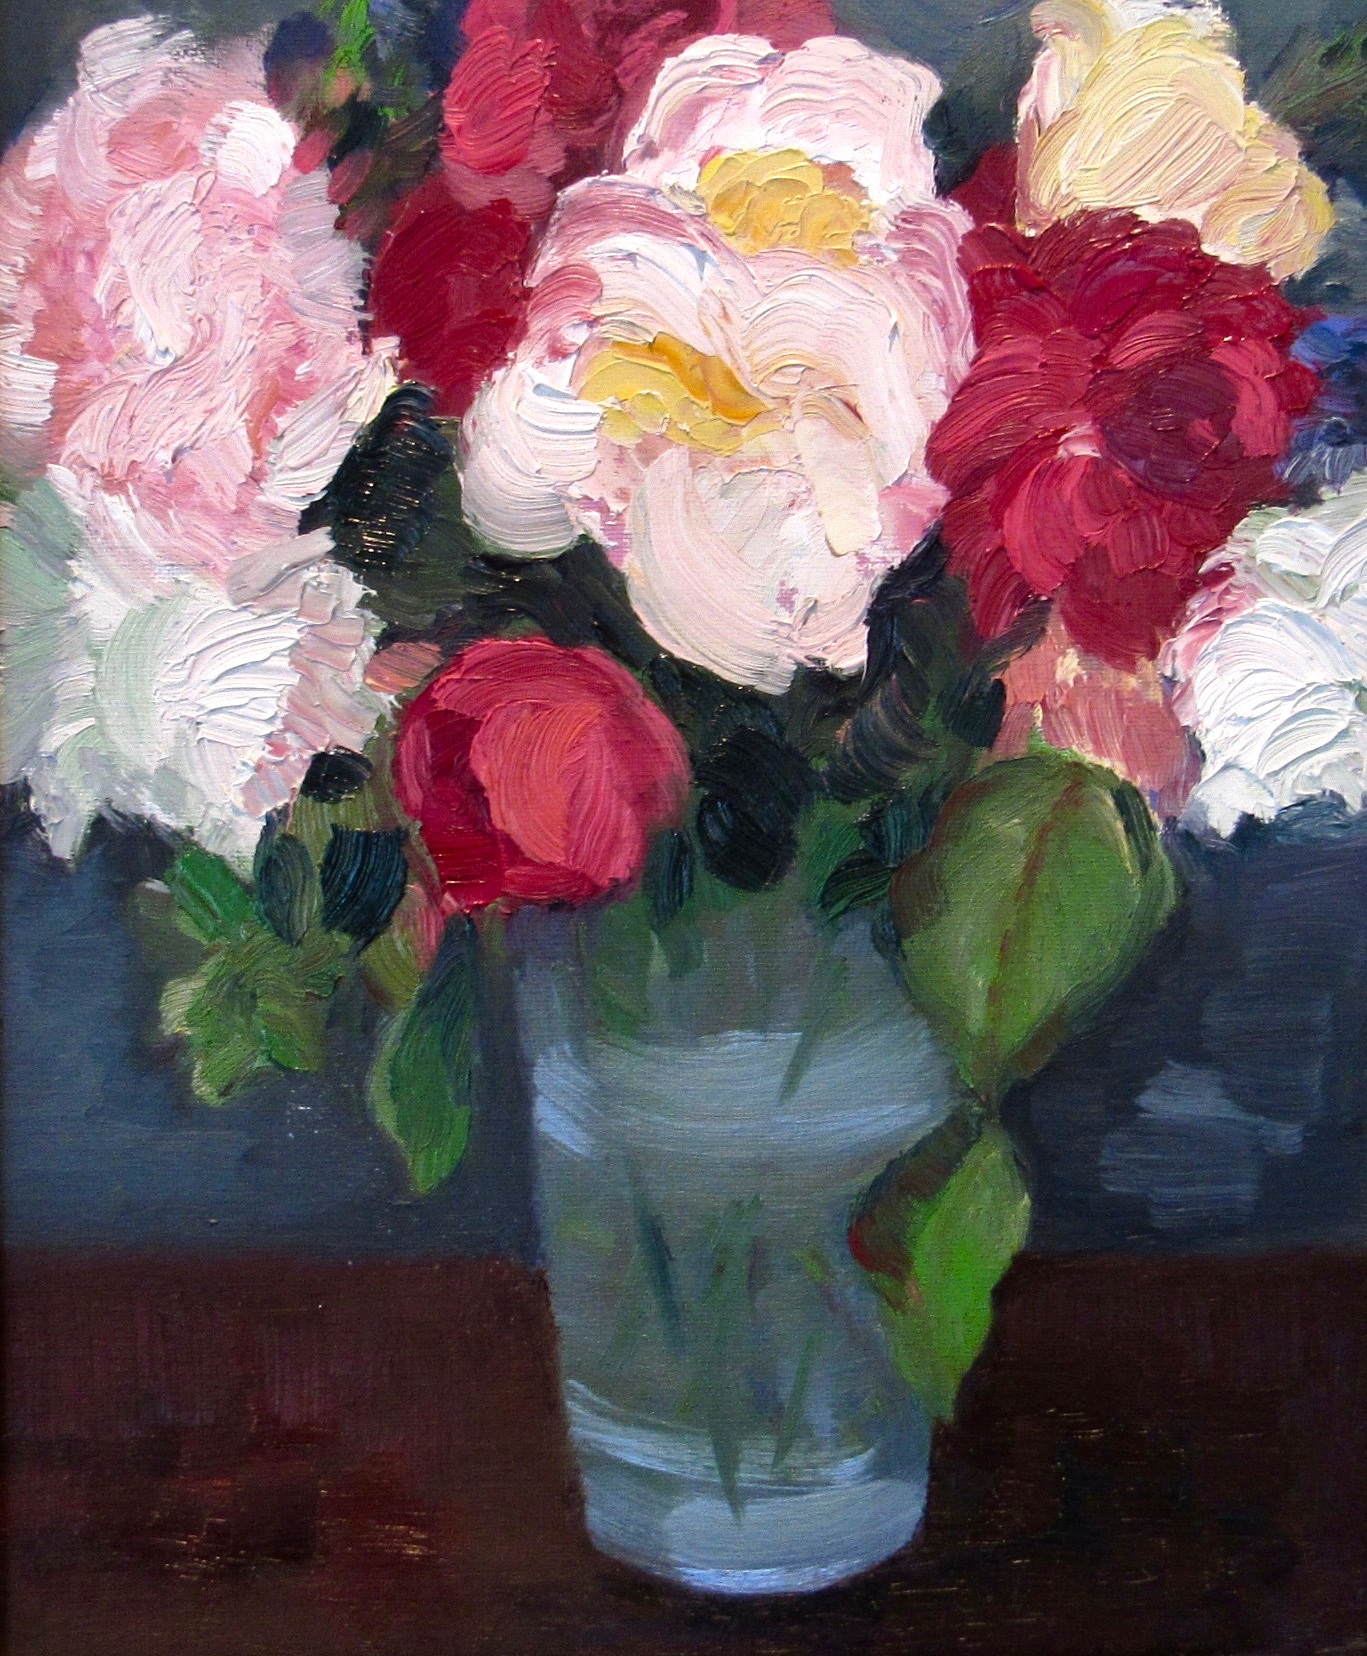 Roses and Carnations, 2018